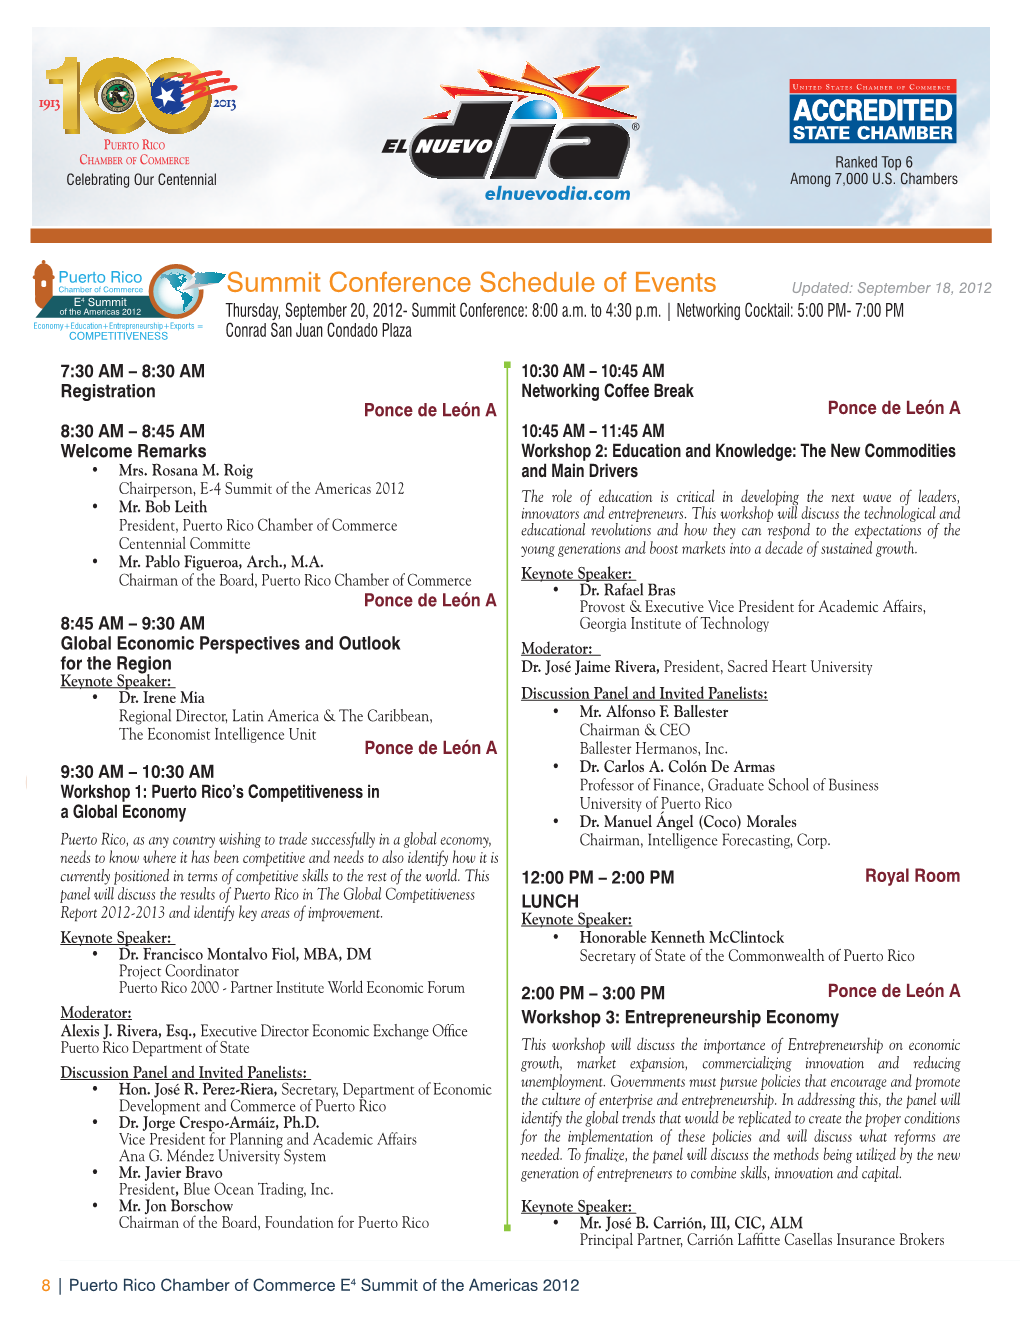 Puerto Rico Summit Conference Schedule of Events